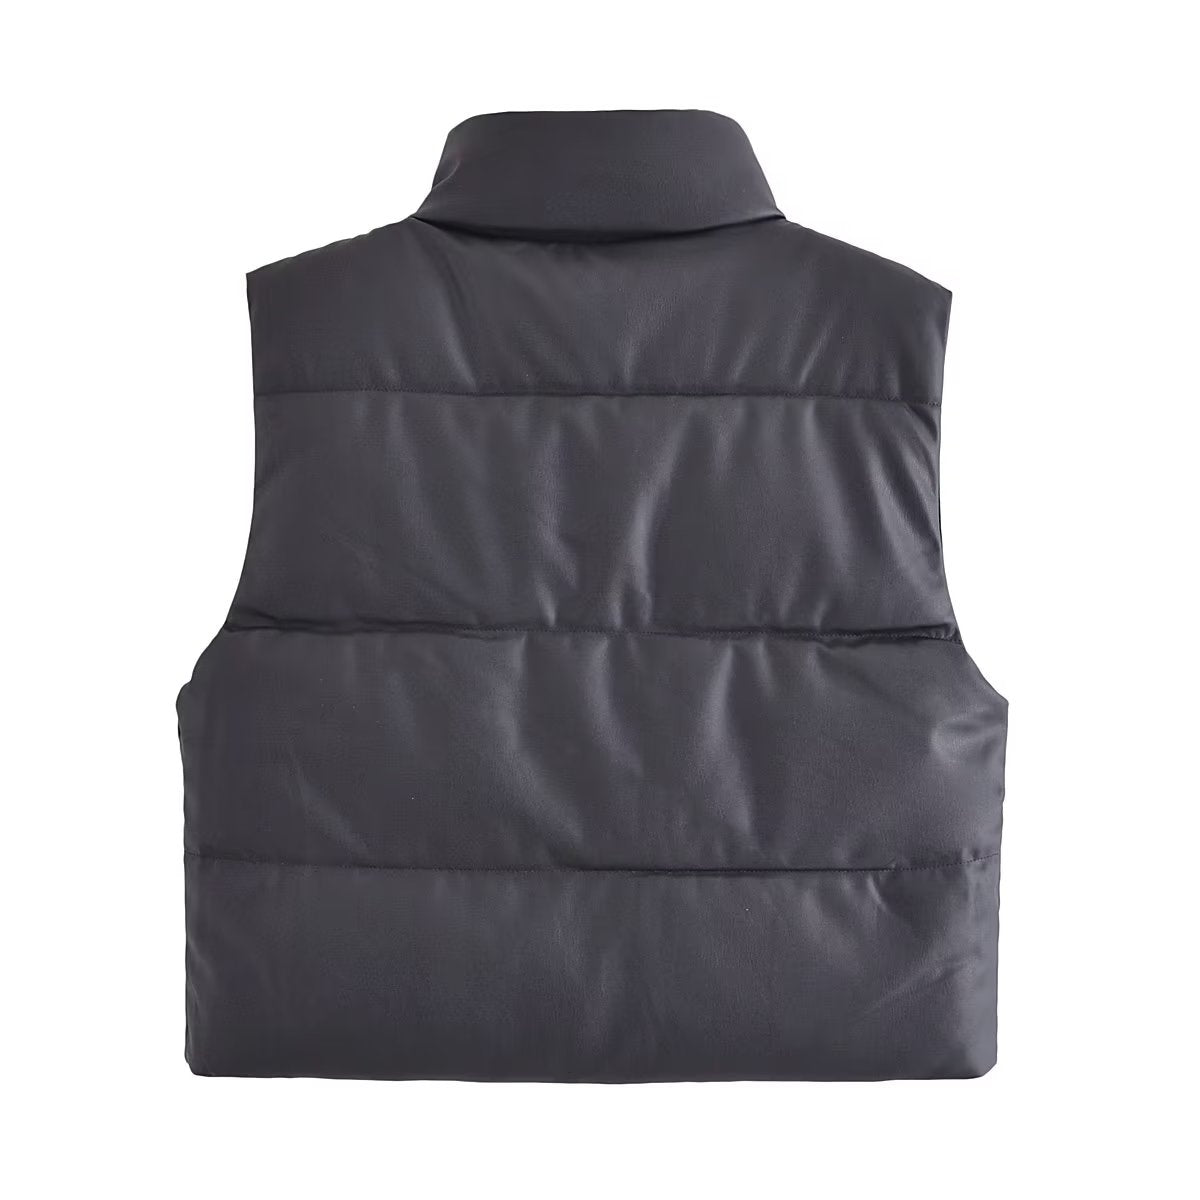 Autumn Popular Casual Black Faux Leather Stand Collar Sleeveless Cotton Padded Jacket Vest Women